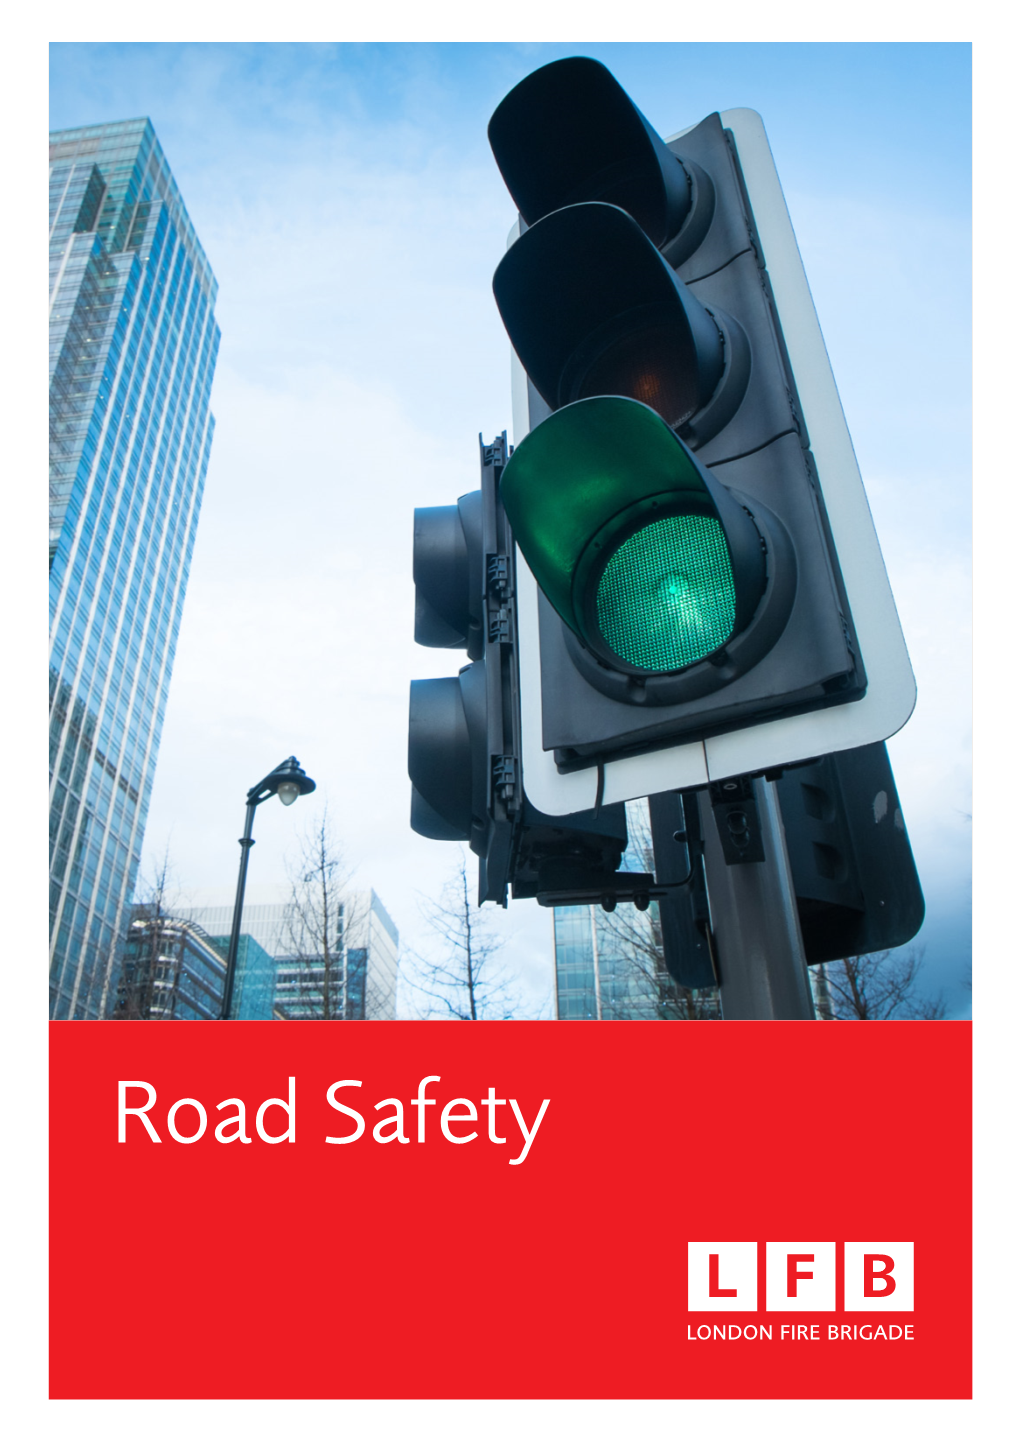 Road Safety London Fire Brigade (LFB) Attend at Least 10 Road Traffic Collisions a Day in London